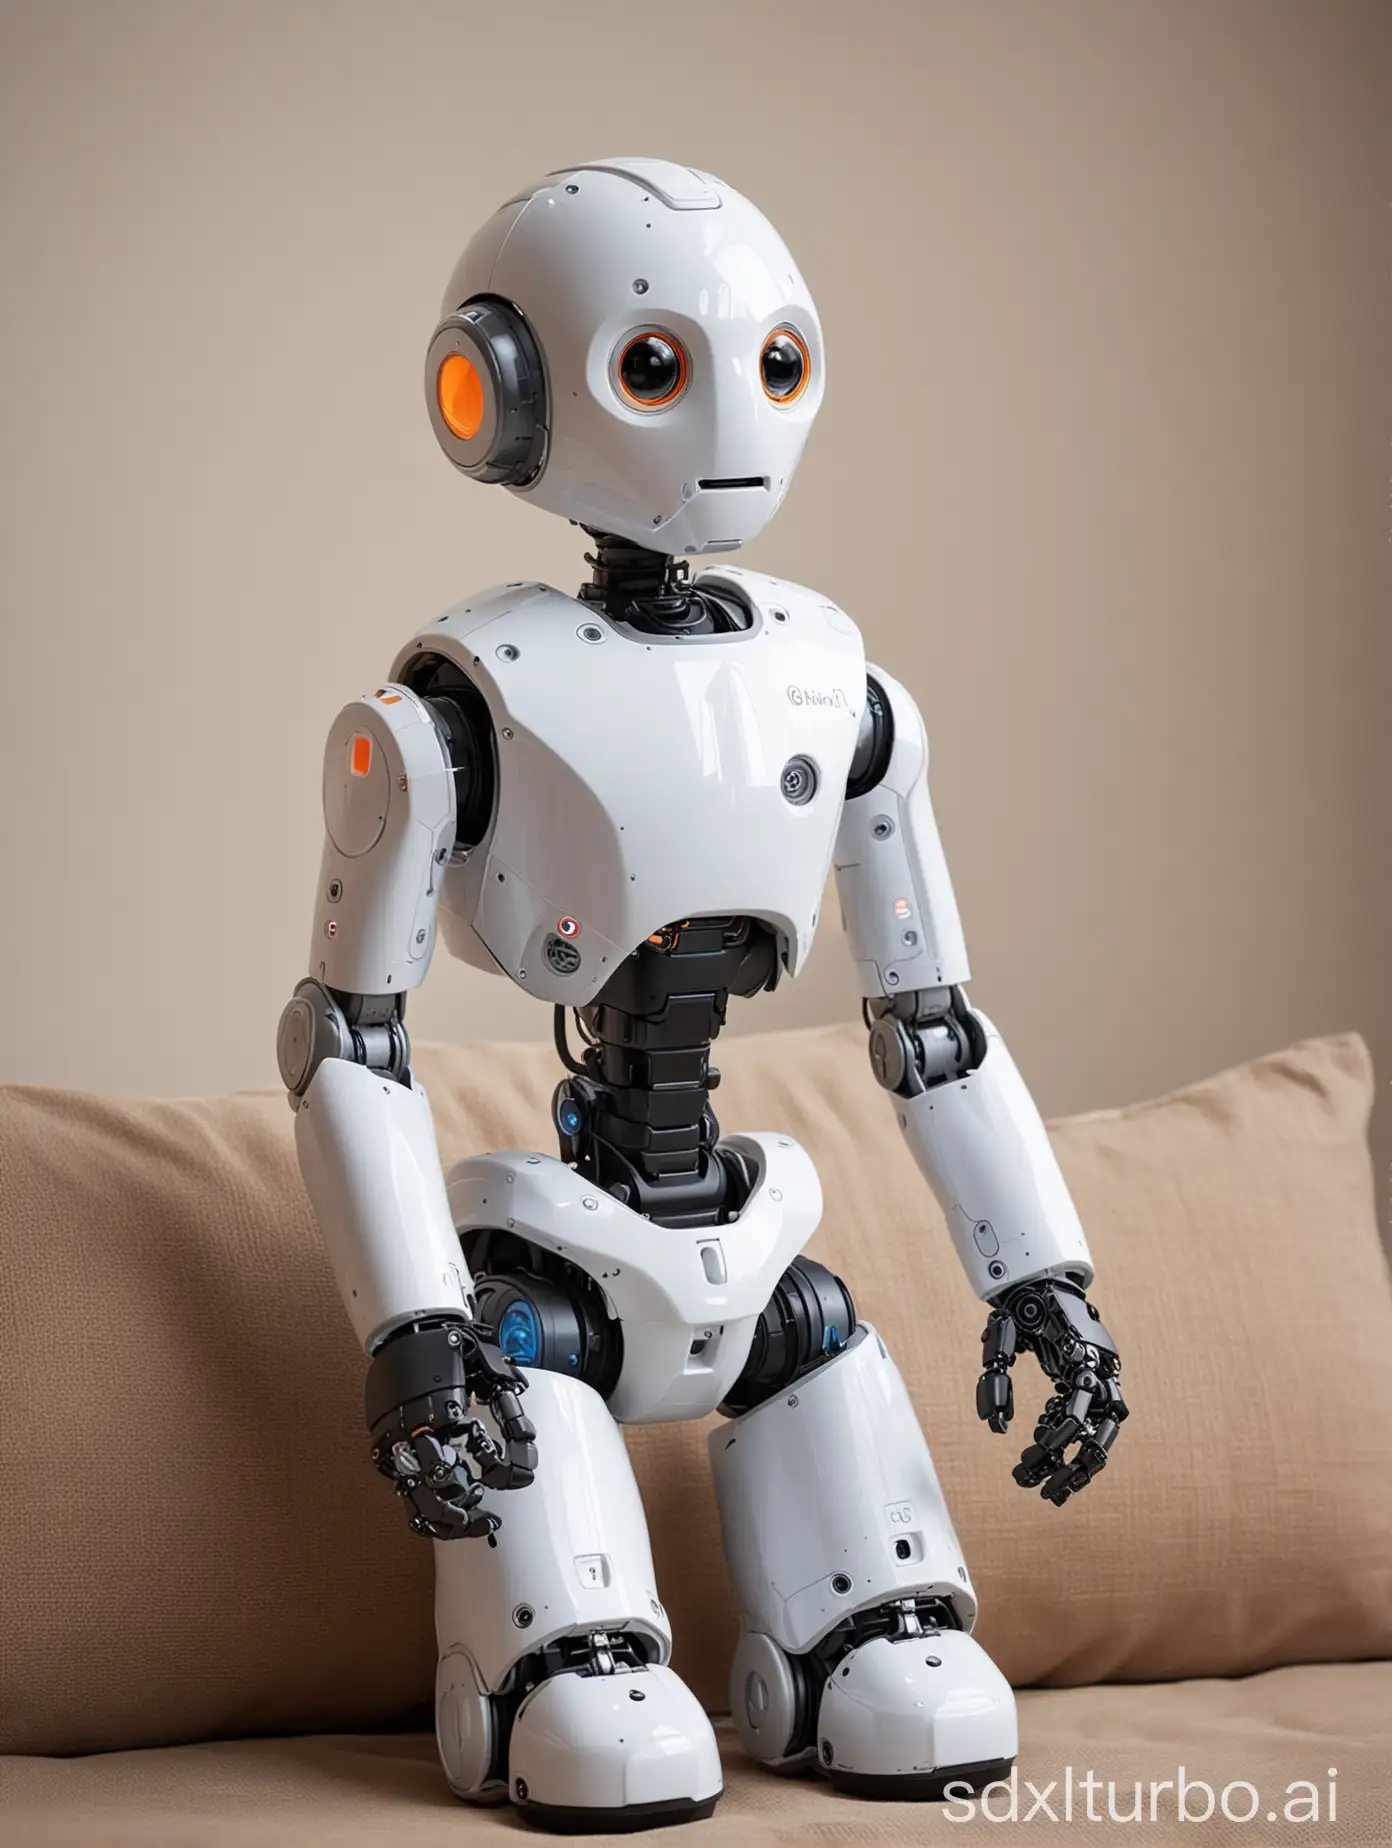 Albert is a small education robot with which children can communicate by means of a smartphone and the associated "Smart Robot Application". The smartphone is installed onto the robot’s stomach and connected to it via Bluetooth. Albert can thus be controlled via the smartphone, read books out loud or play with the child. His friendly outward appearance hides a range of sensors which allow Albert to react to his environment.